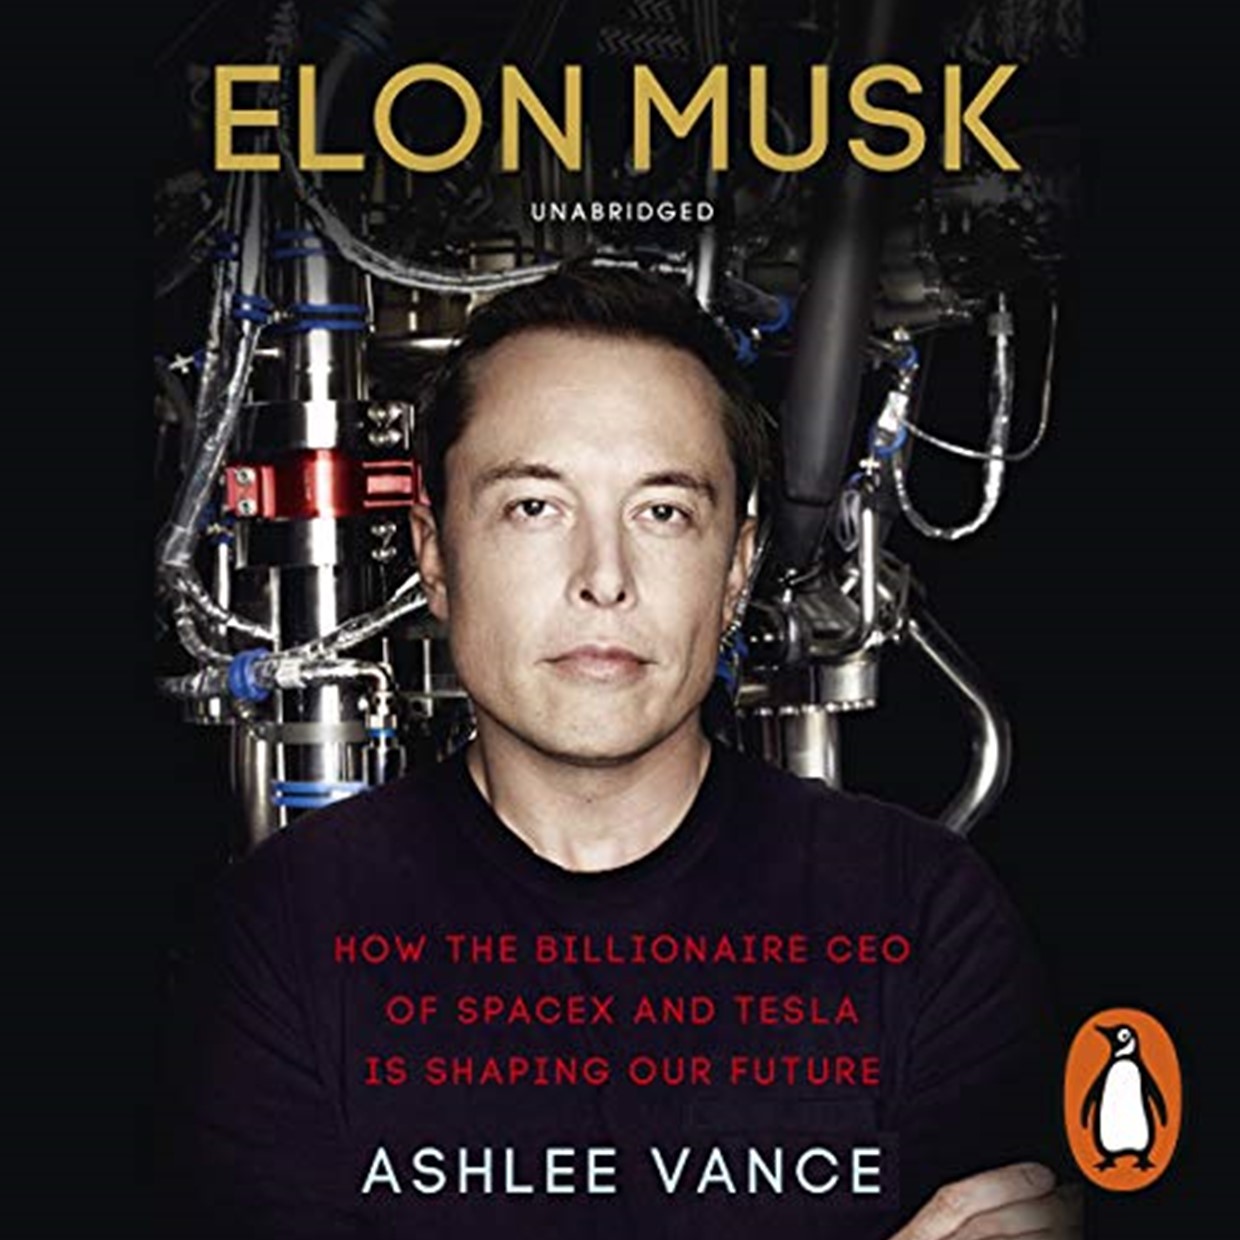 Elon Musk book review under 400 words from publishmystories.com